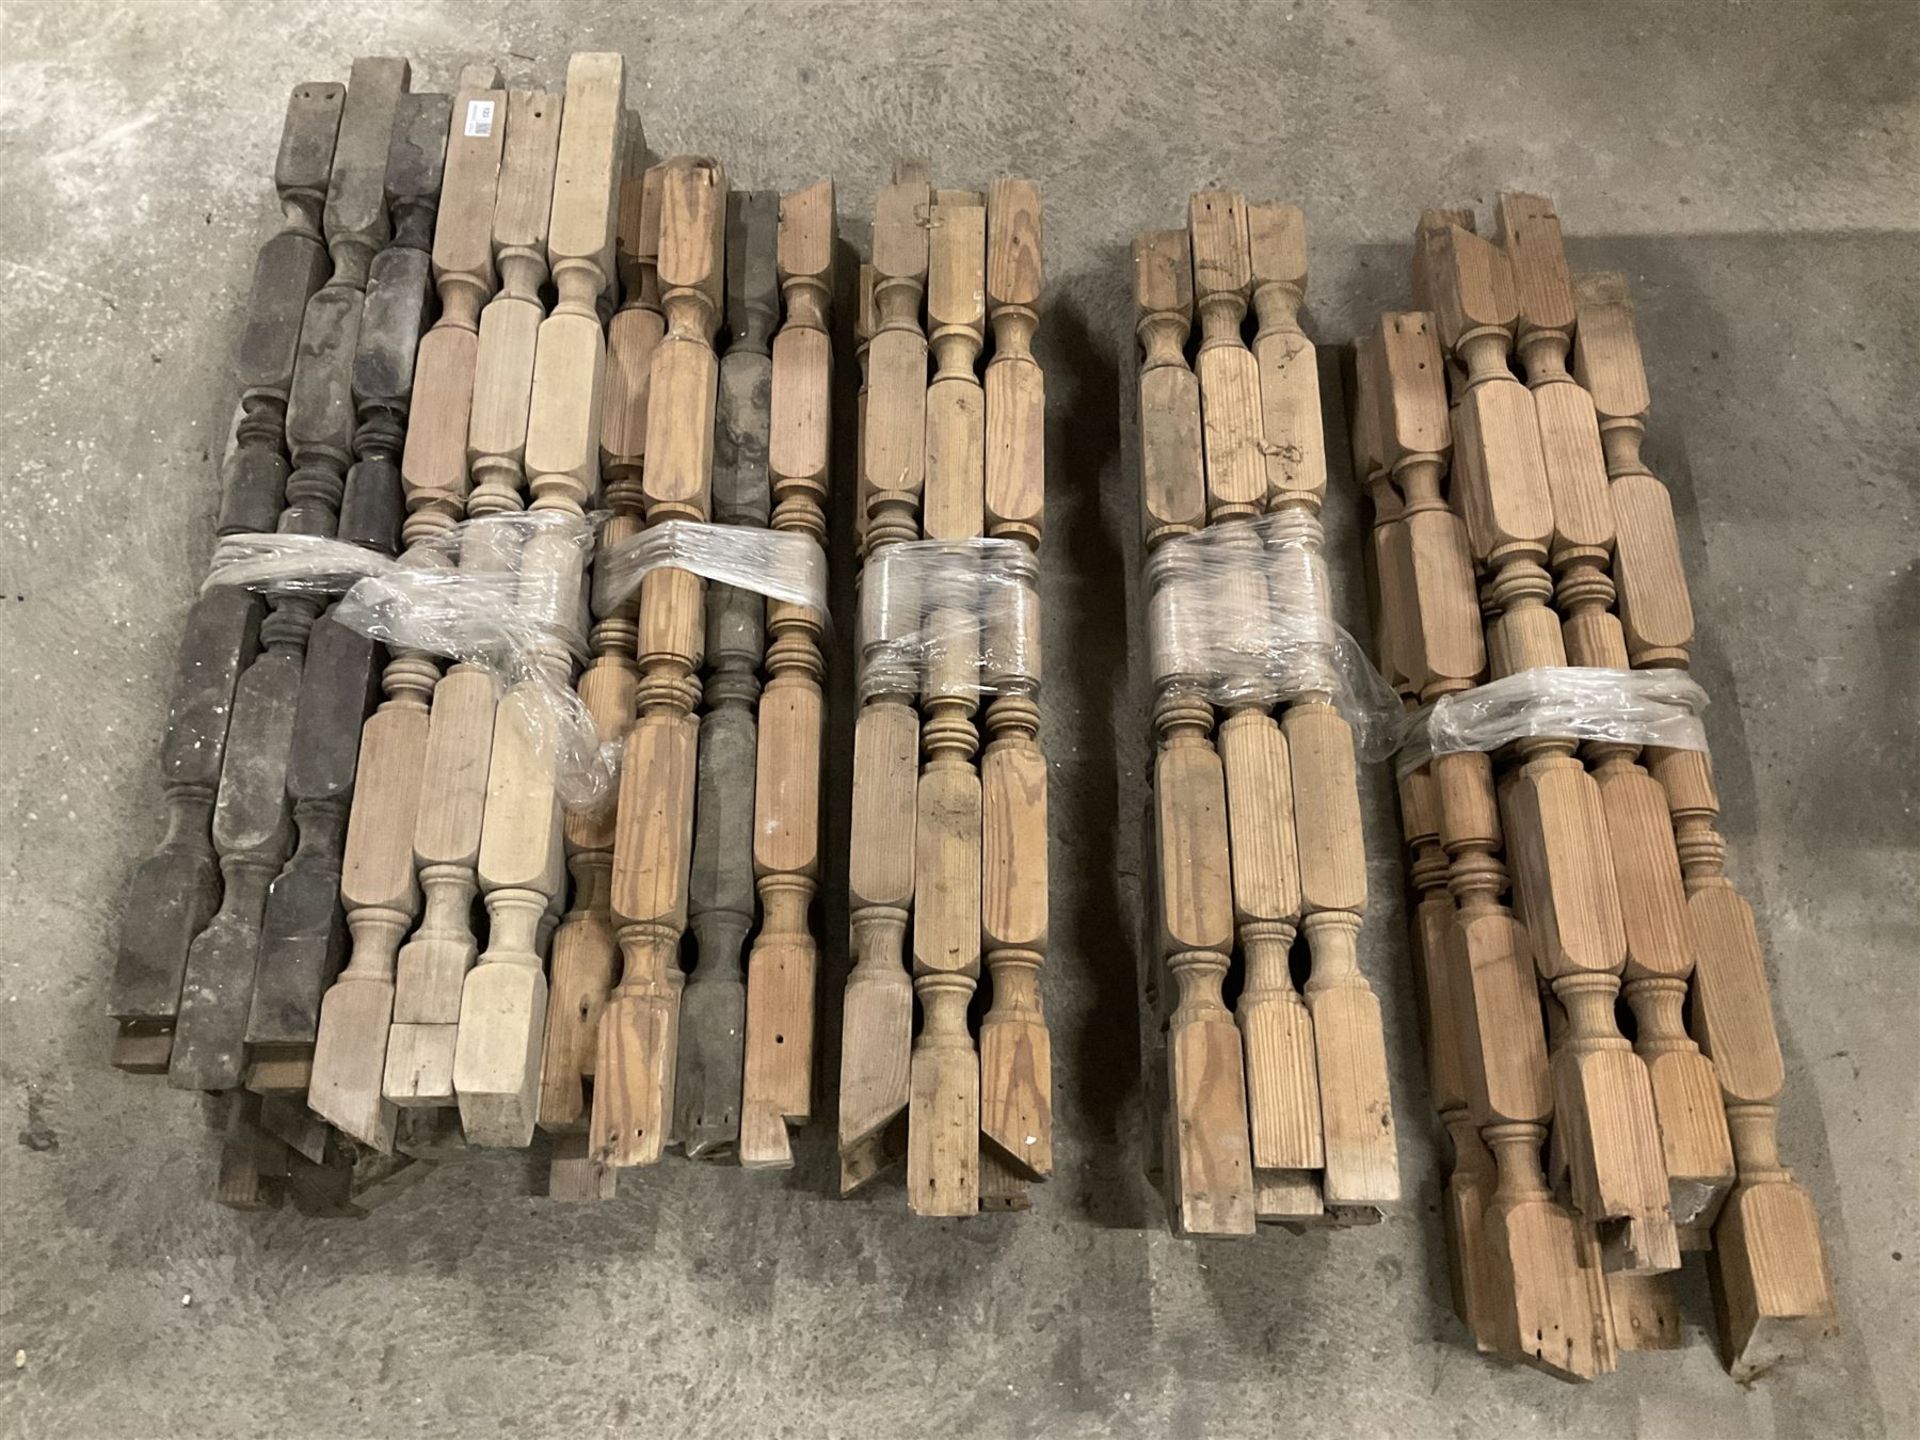 Approx. 55 turned pine staircase spindles